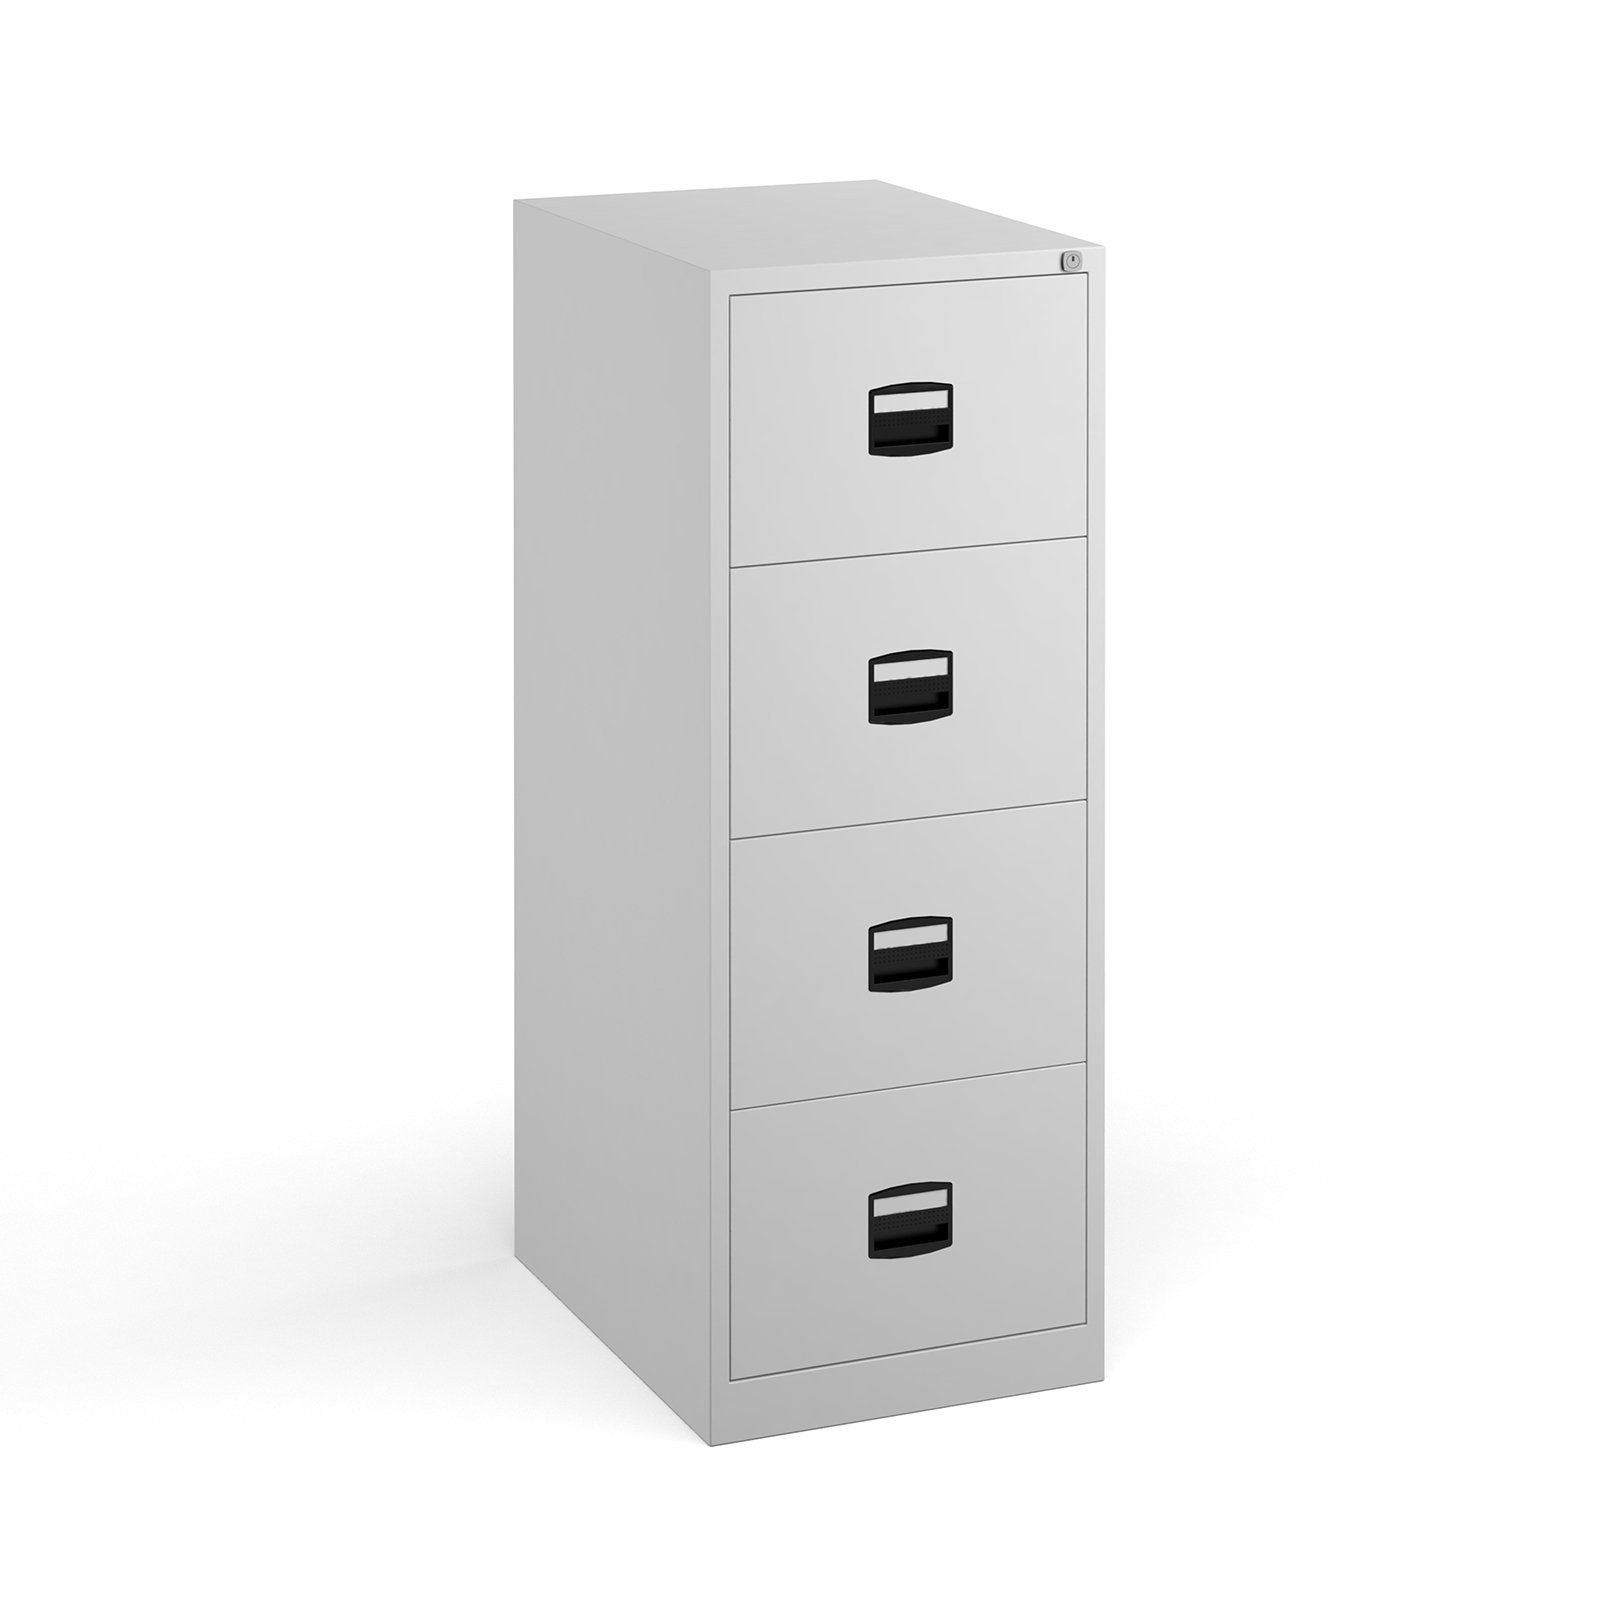 Steel Steel 4 drawer contract filing cabinet 1321mm high - white